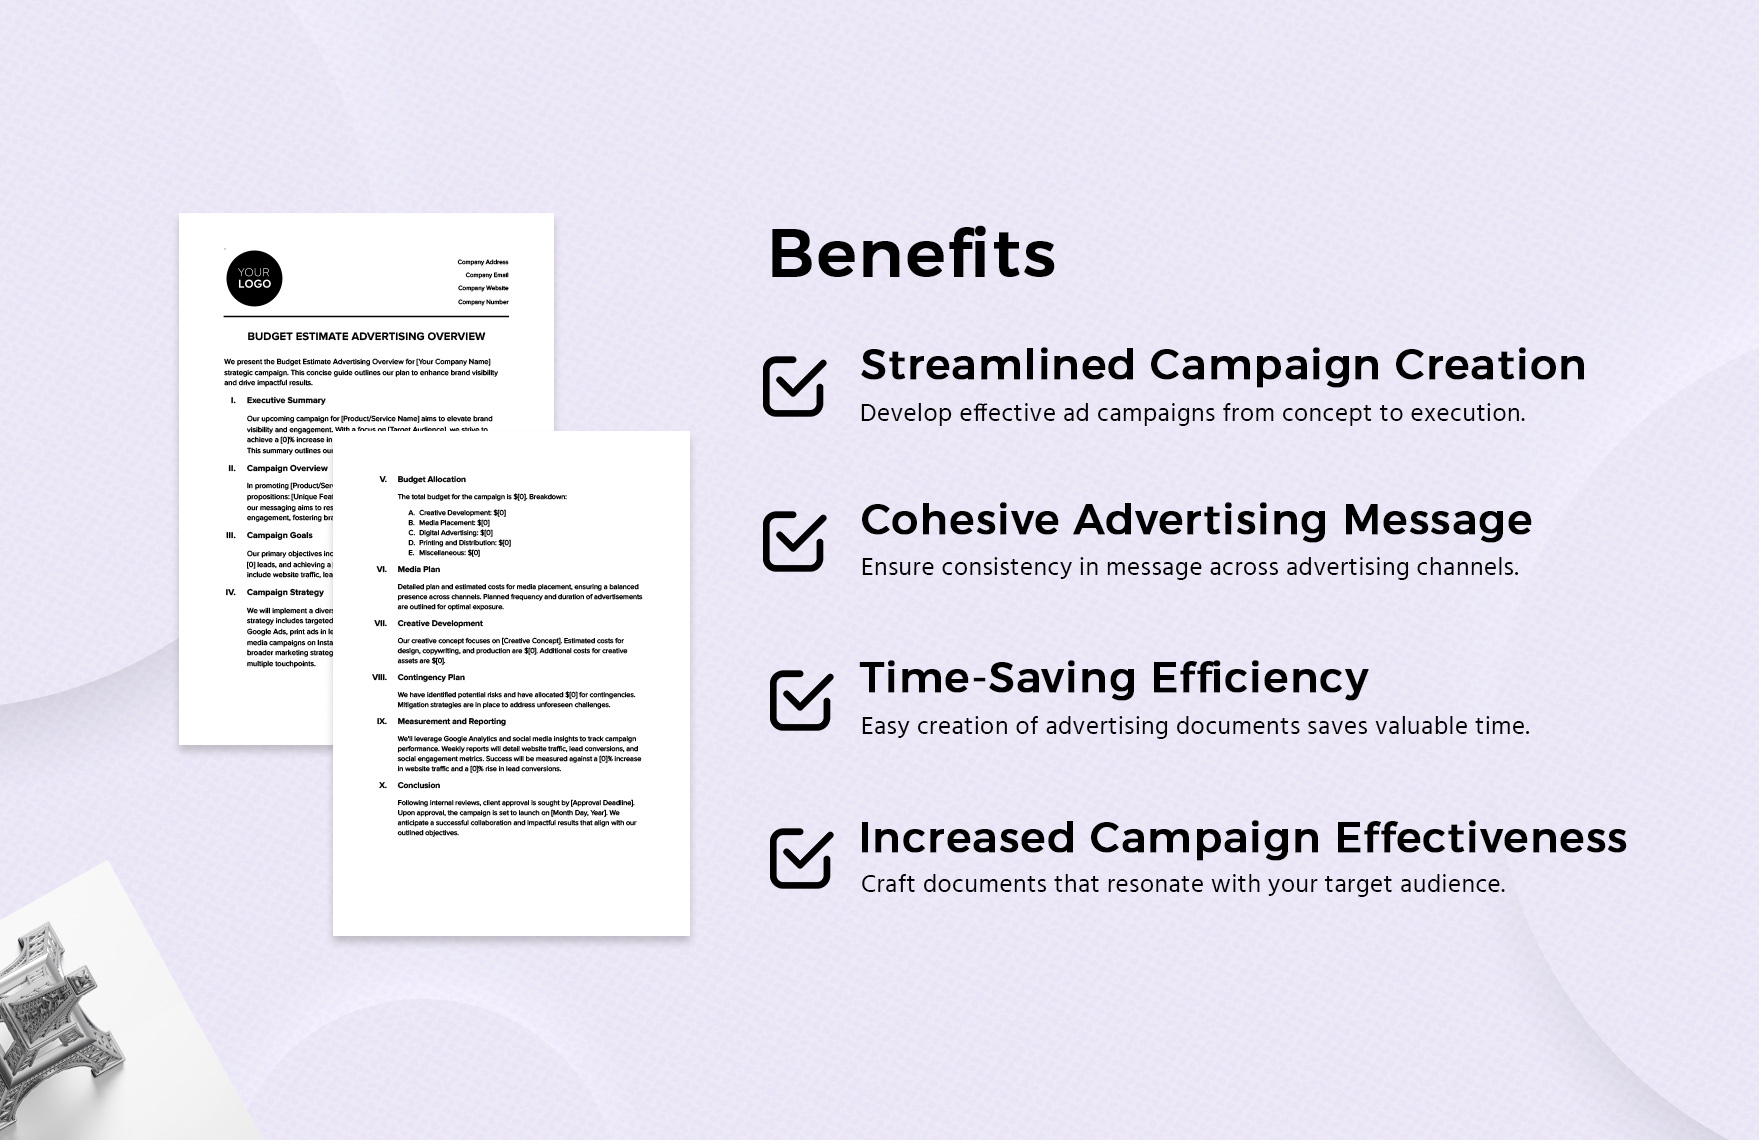 Budget Estimate Advertising Overview Template